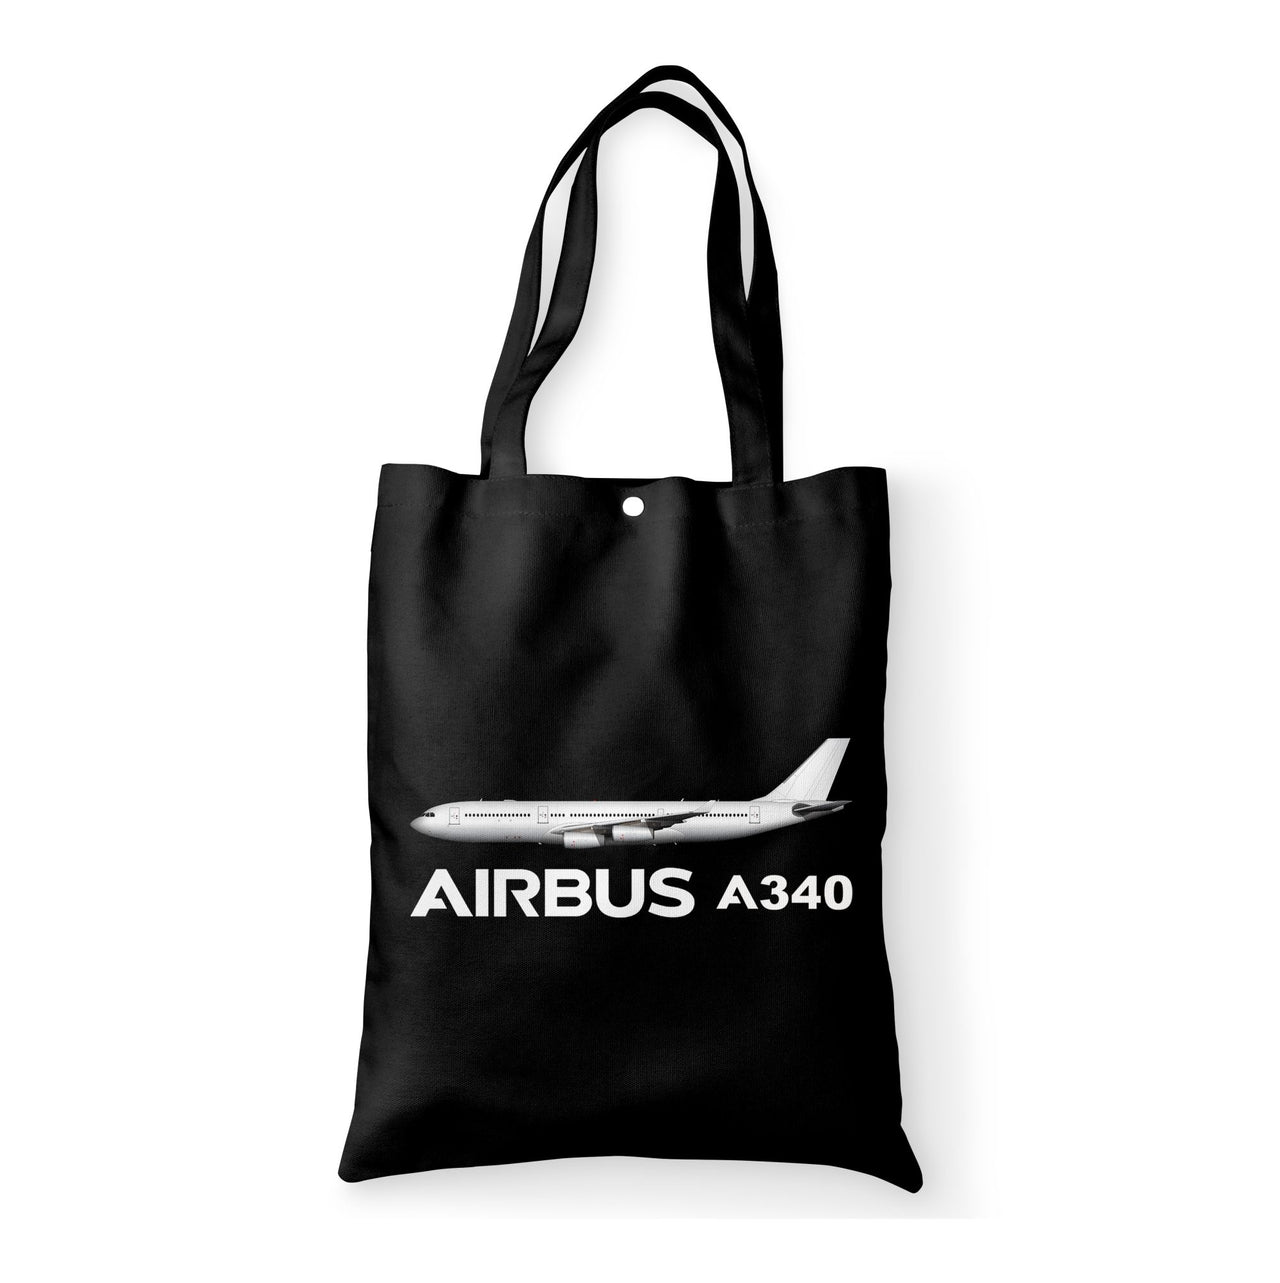 The Airbus A340 Designed Tote Bags